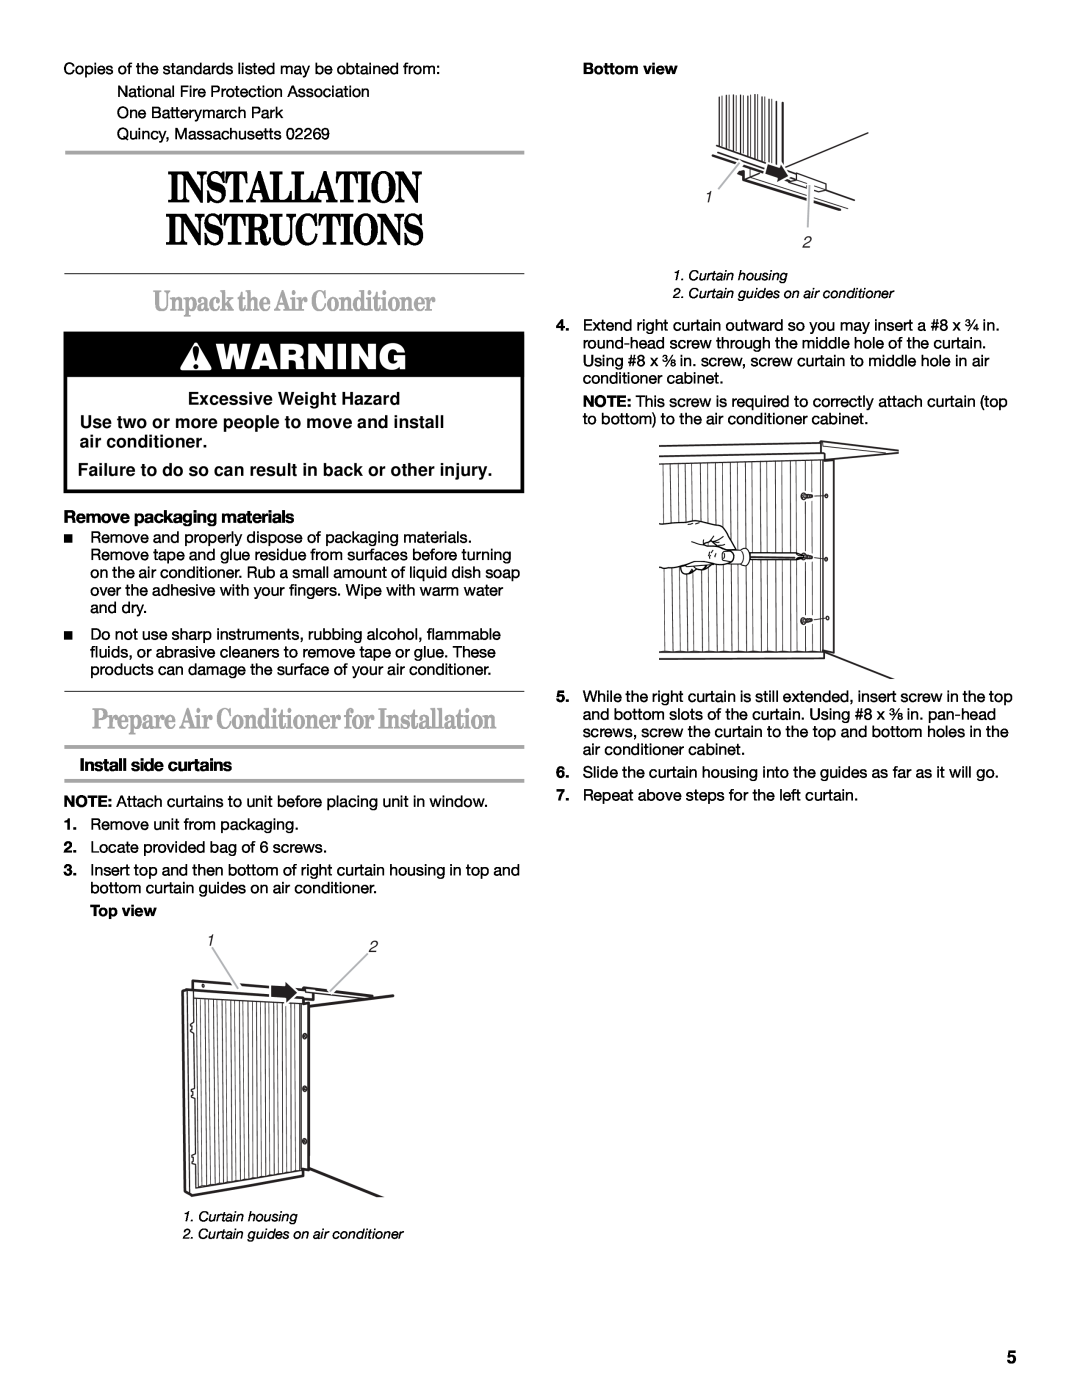 Whirlpool ACQ062MP0 manual Installation Instructions, Unpack the Air Conditioner, Prepare Air Conditioner for Installation 